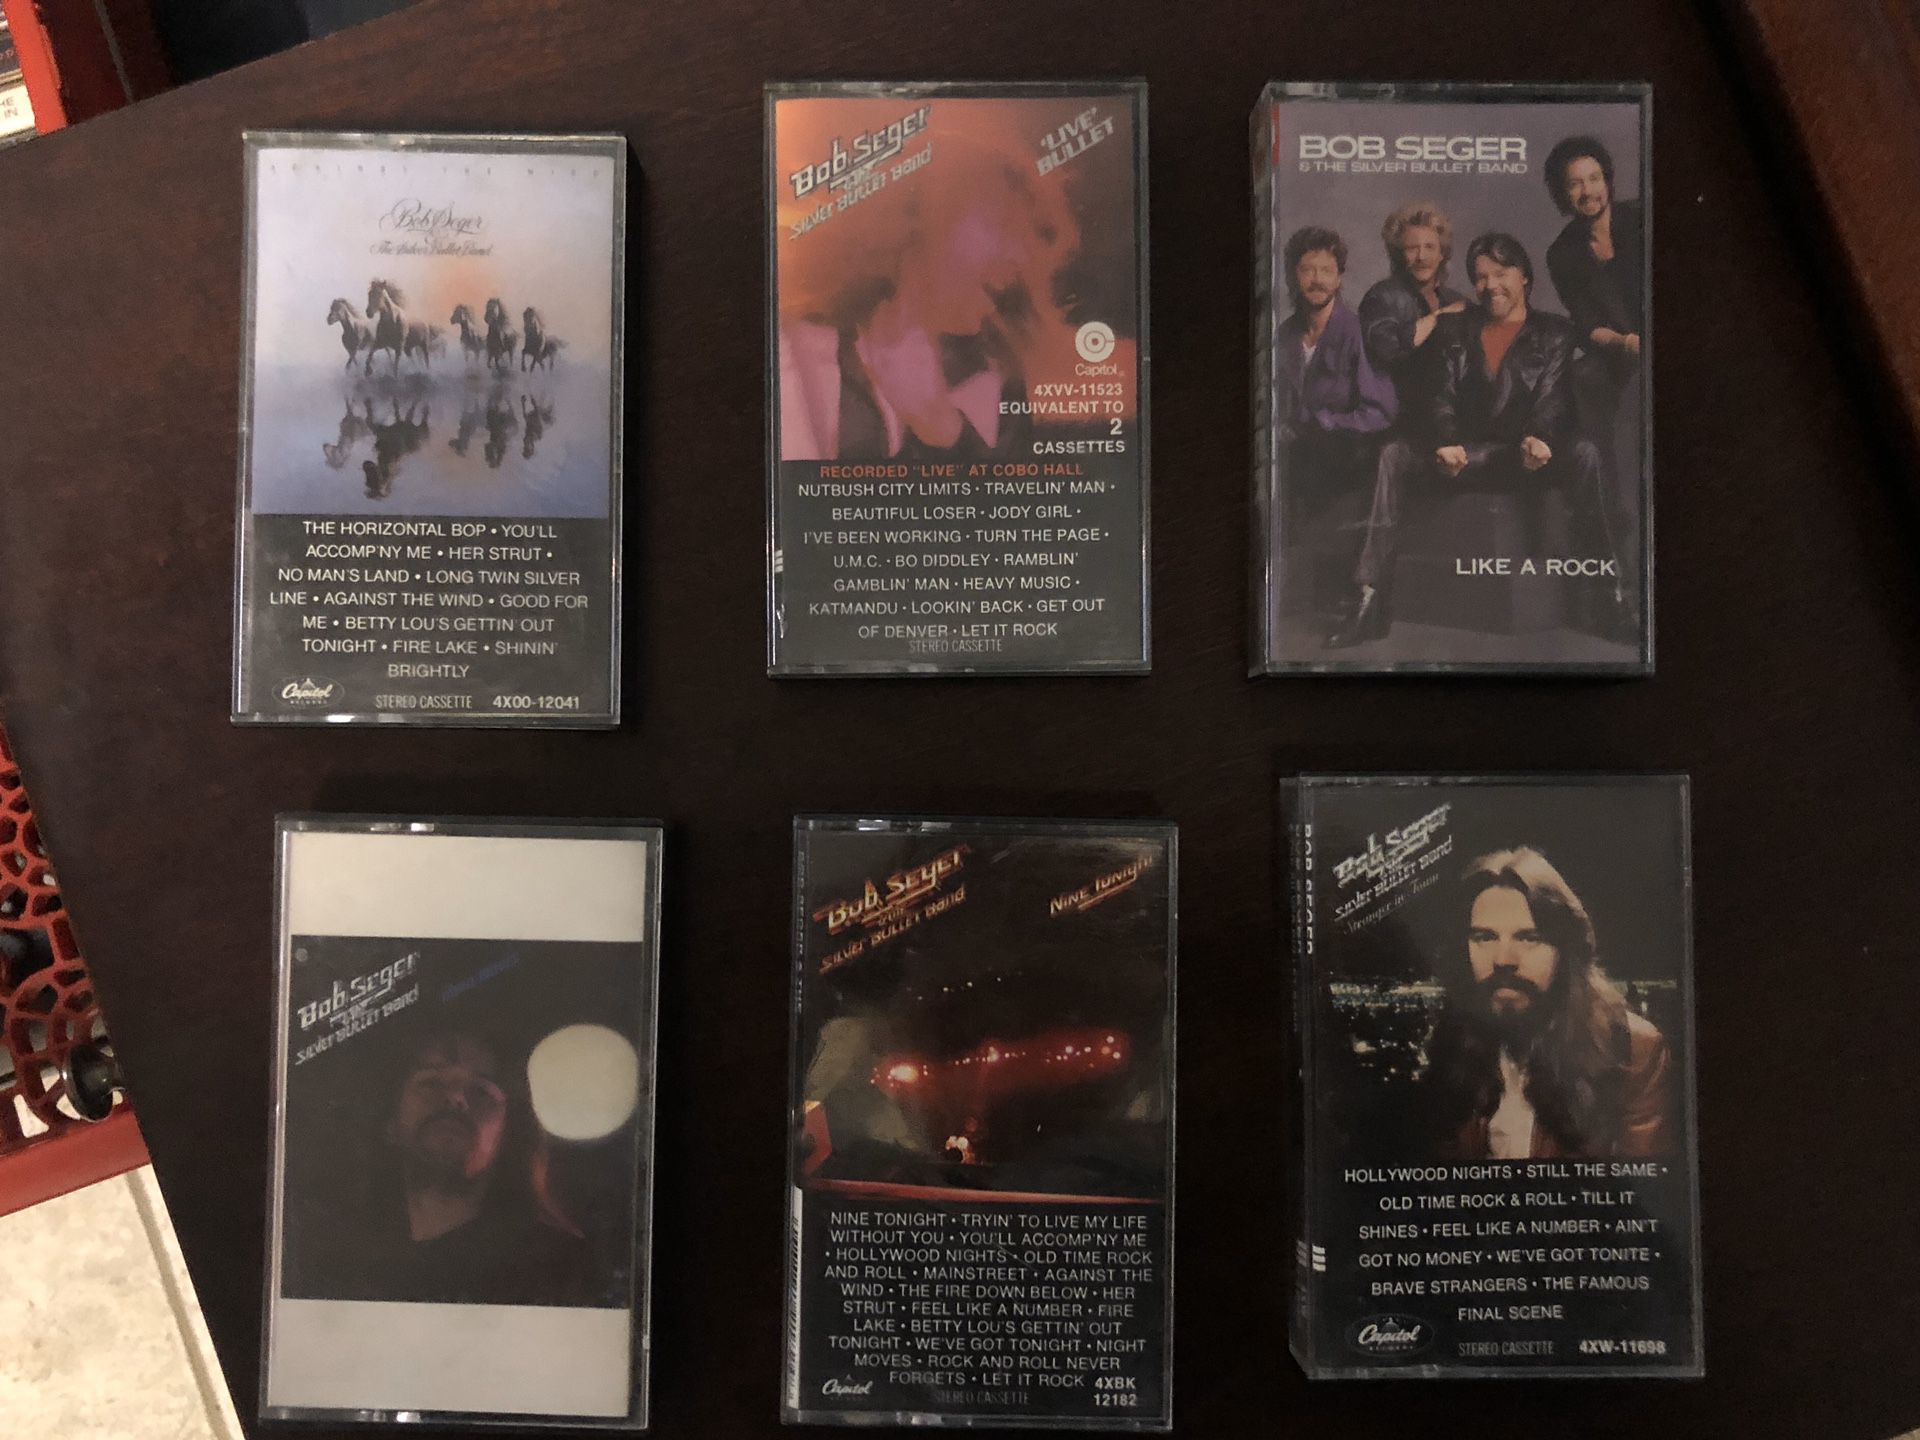 Bob Seger & the Silver Bullet Band set of six cassettes